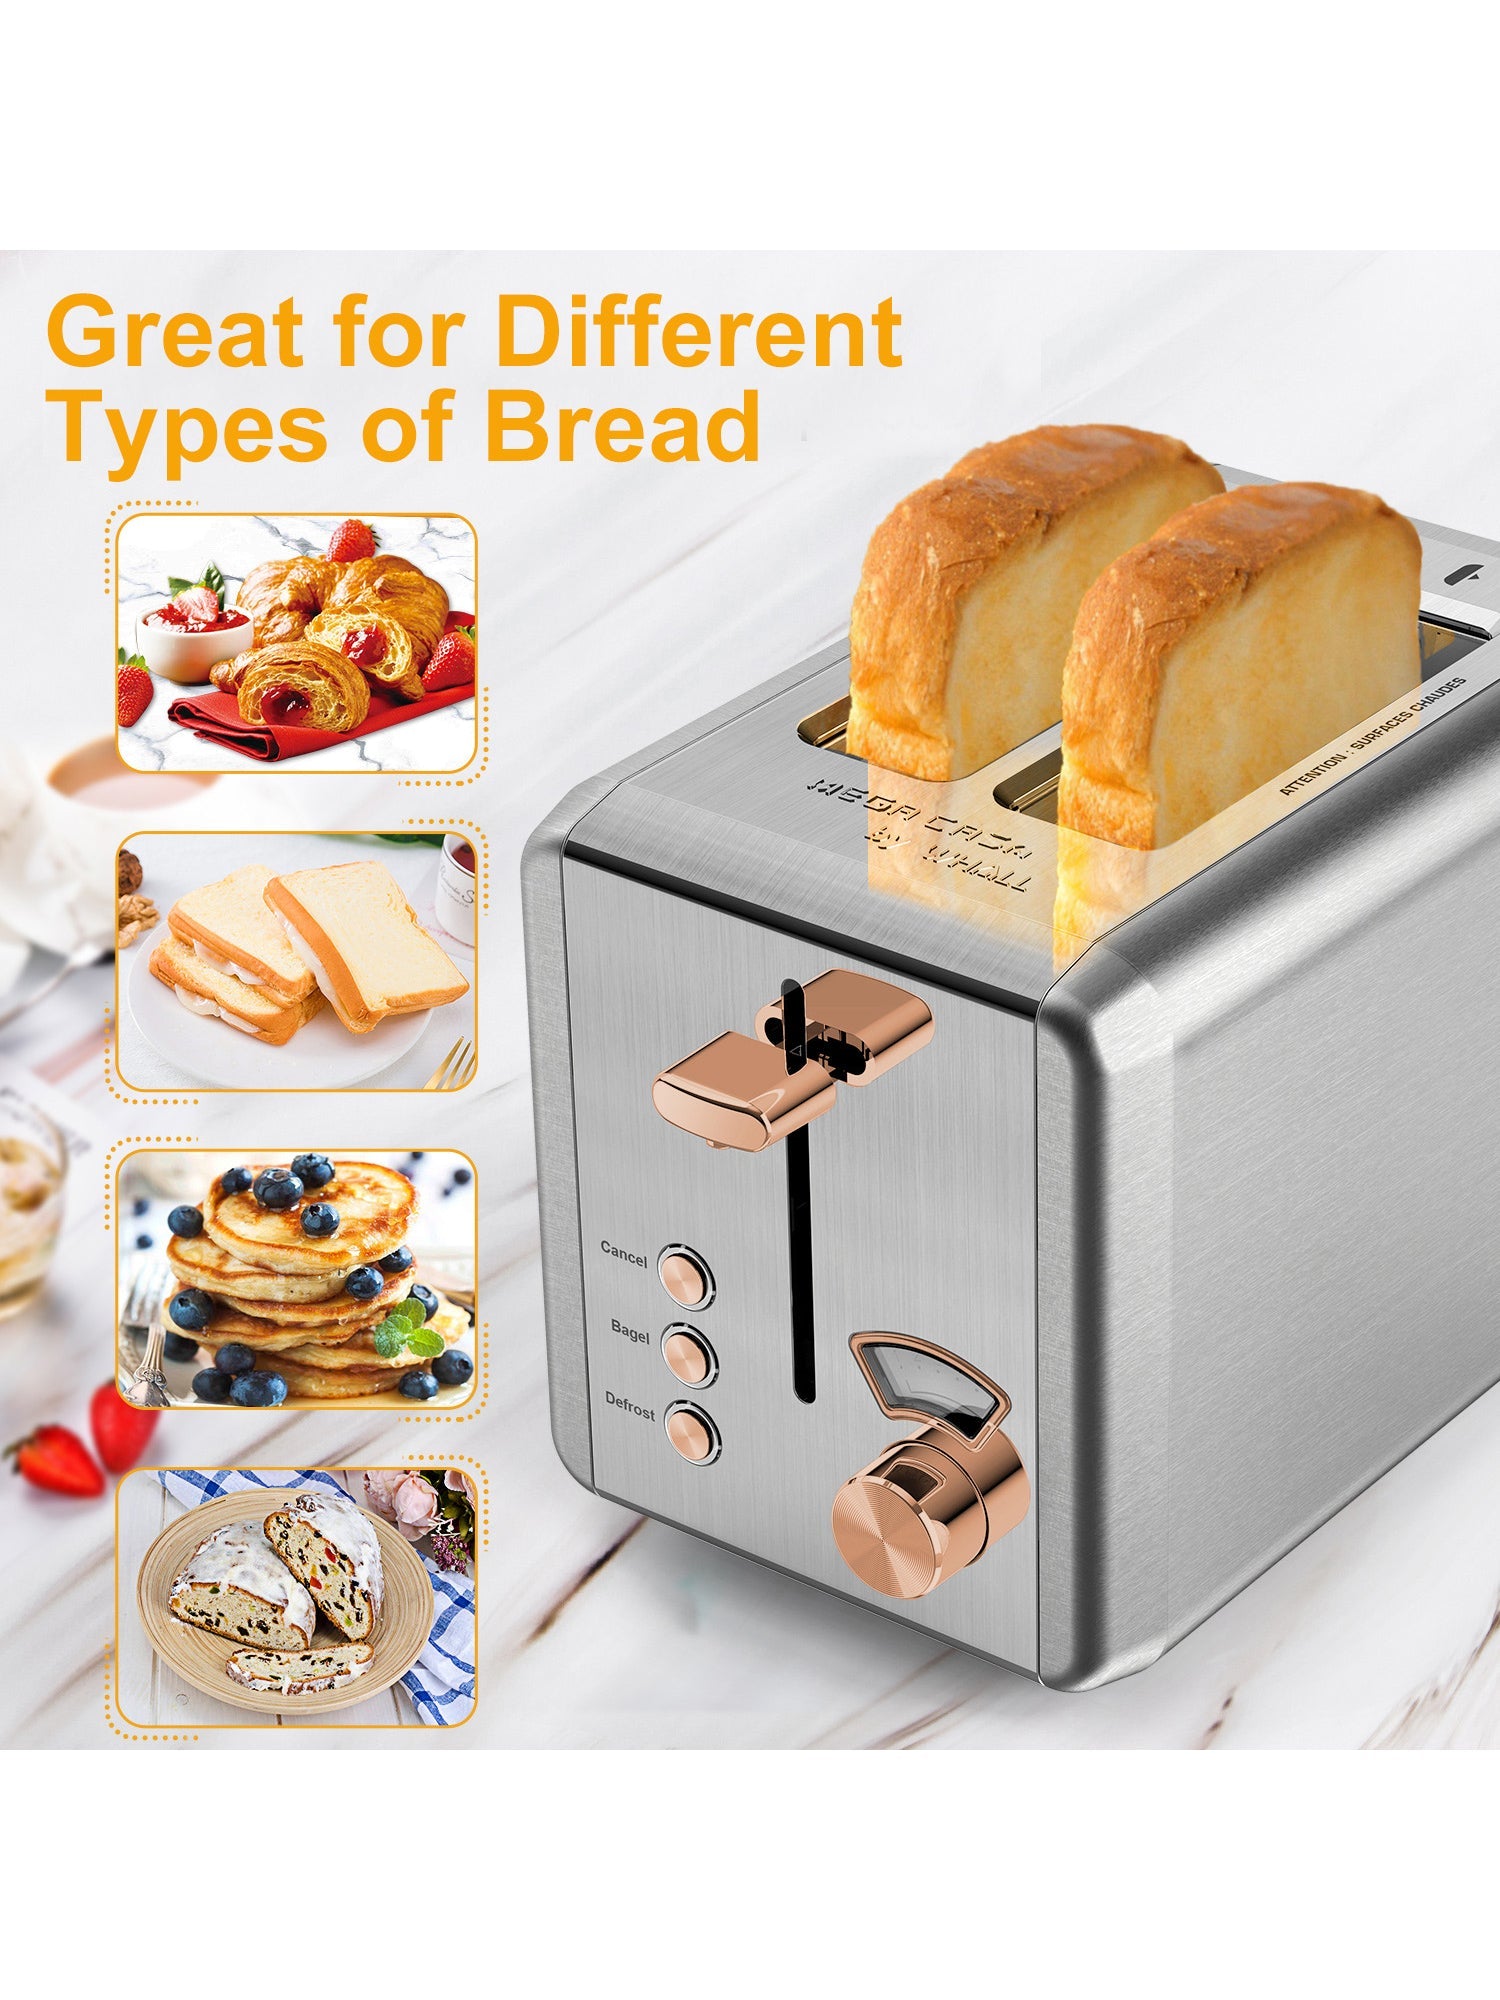 WHALL Toaster 2 slice Stainless Steel Toasters with Bagel, Cancel, Defrost Function, 1.5in Wide Slot, 6 Shade Settings, Removable Crumb Tray, High Lift Lever, for Various Bread Types (850W)